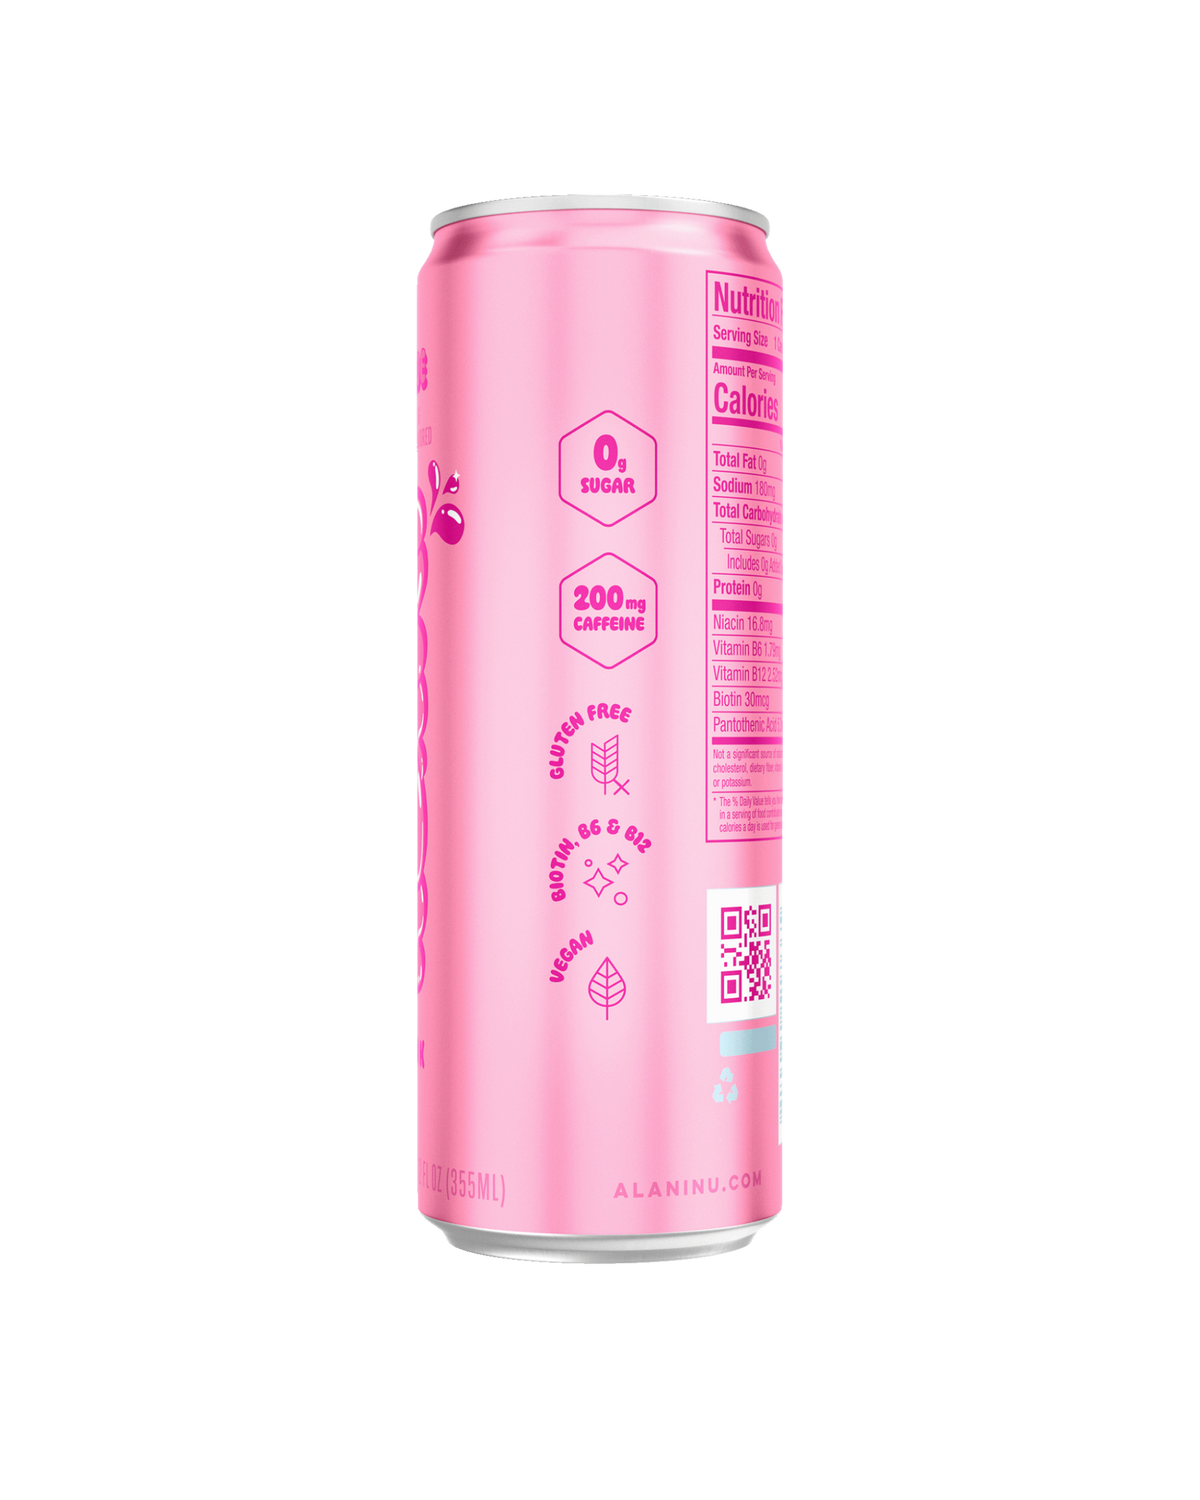 A side view of Energy Drink in Kimade flavor showcasing featured deatils of product.